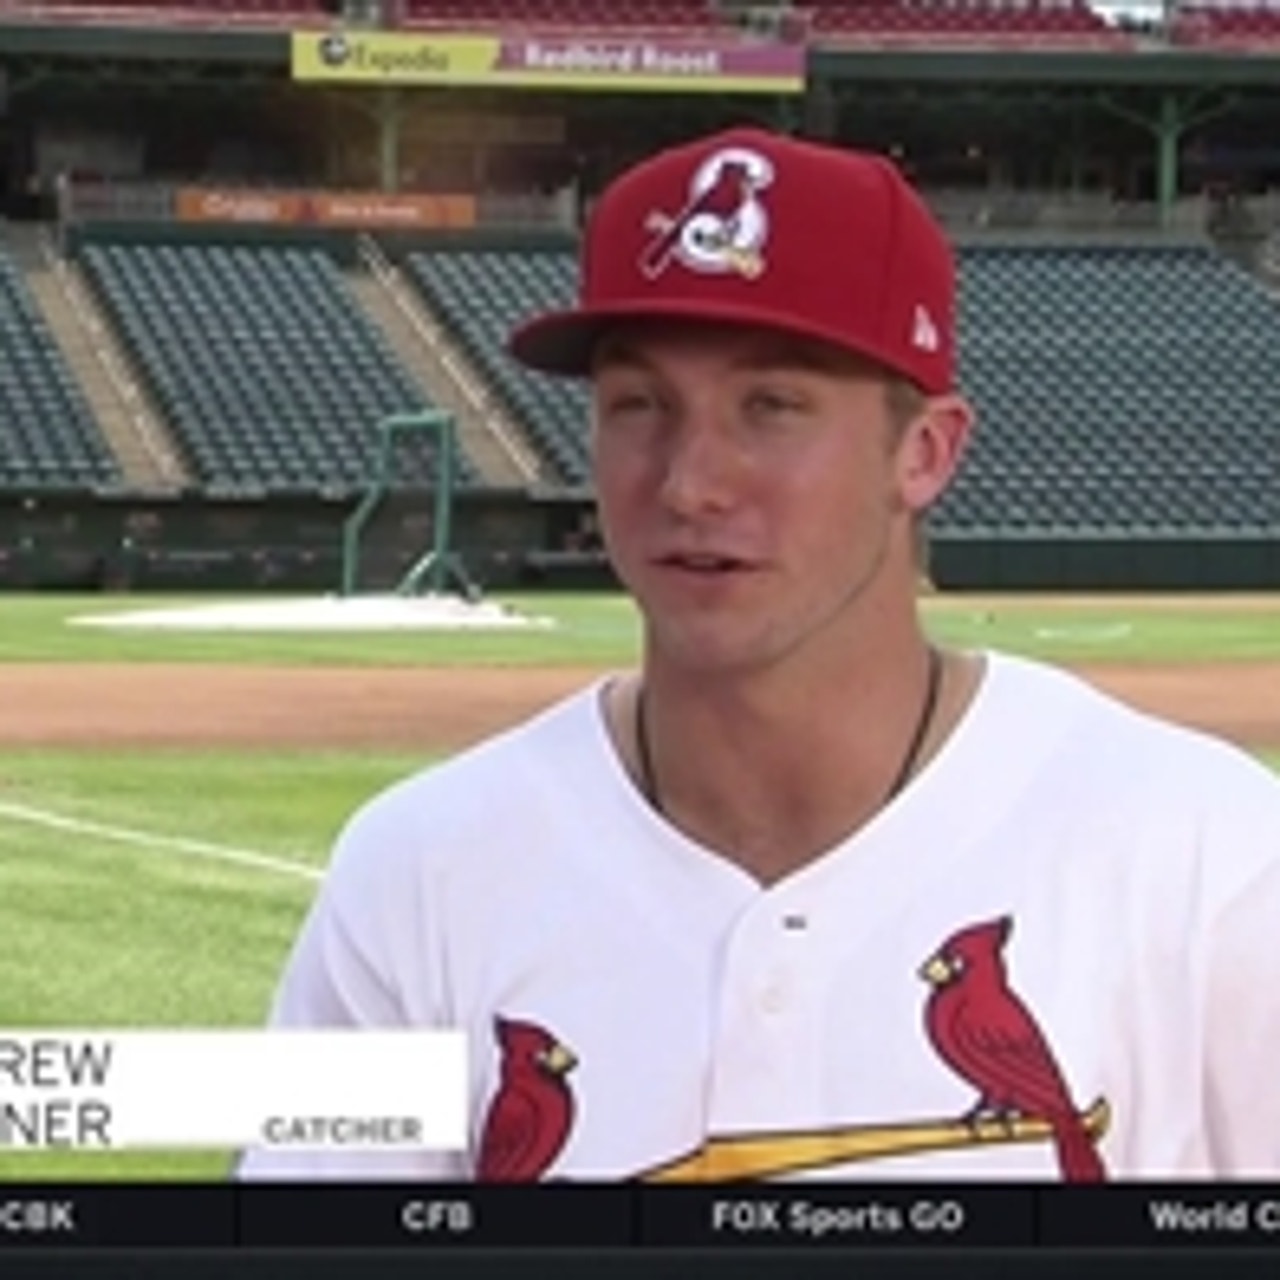 Down on the Farm: Springfield Cardinals C Andrew Knizner